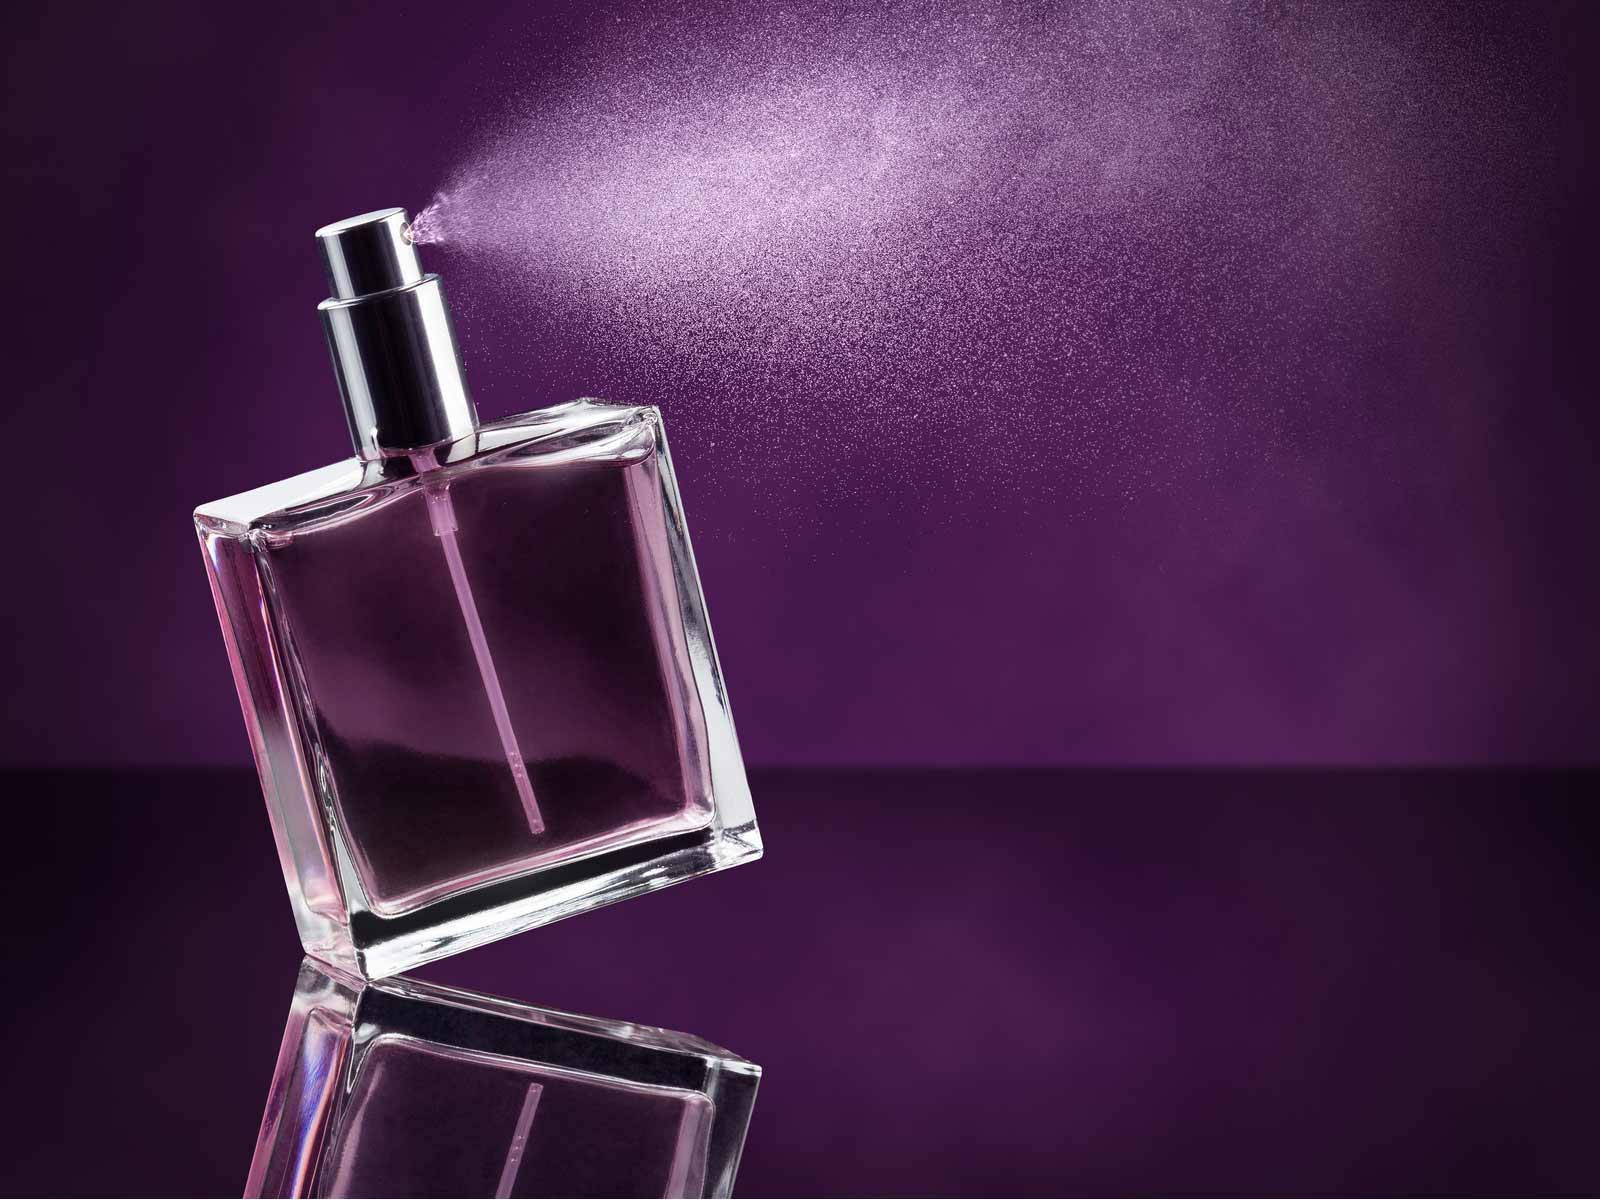 Are Muslims Permitted to Use Alcohol-Based Perfumes?